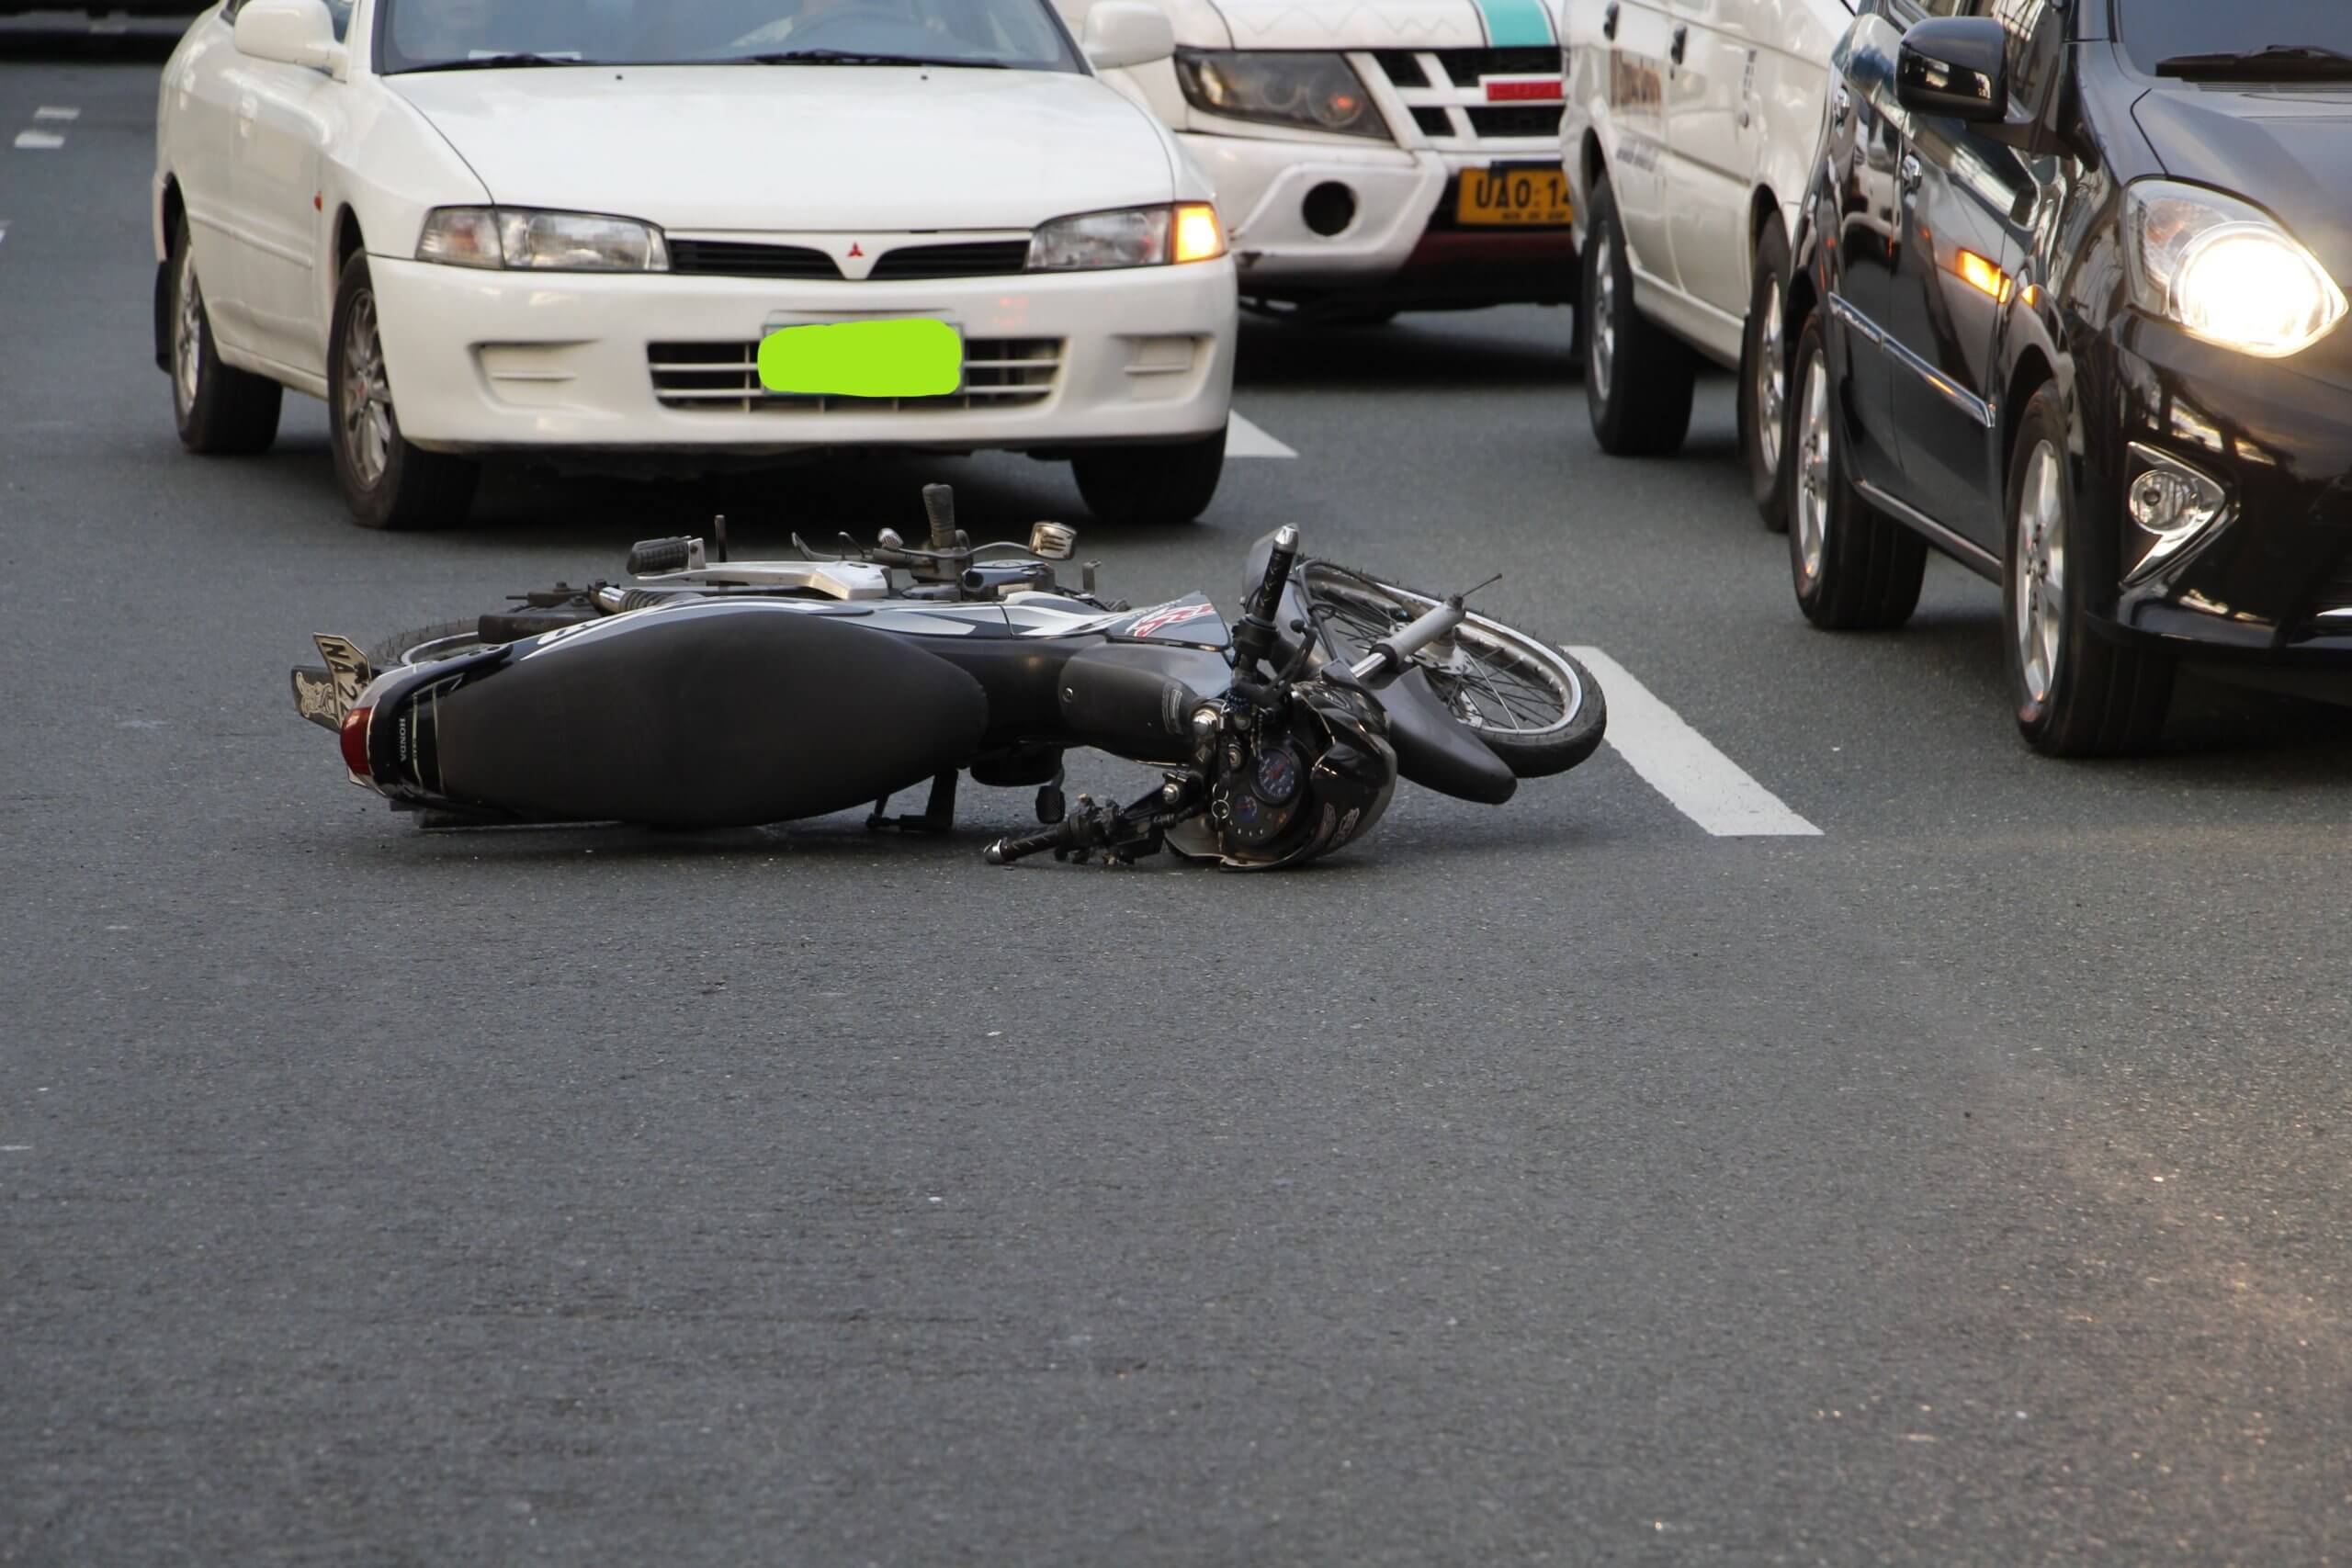 motorcycle accident in a high trafic